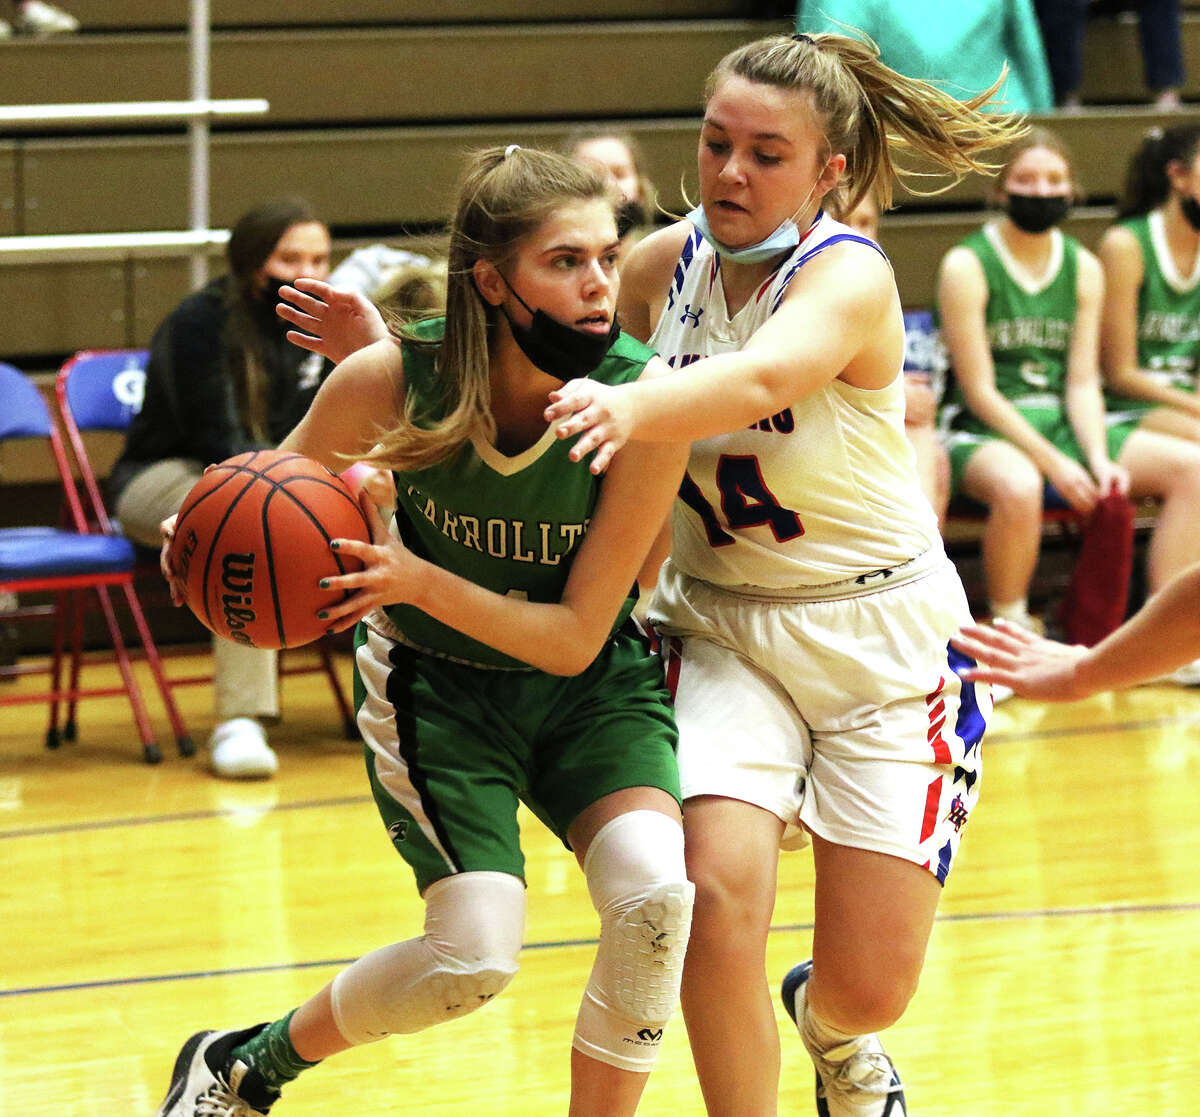 Carrollton's Callie McAdams (right) drives on Carlinville's Braley Wiser in a nonconference girls basketball game Monday night in Carlinville.